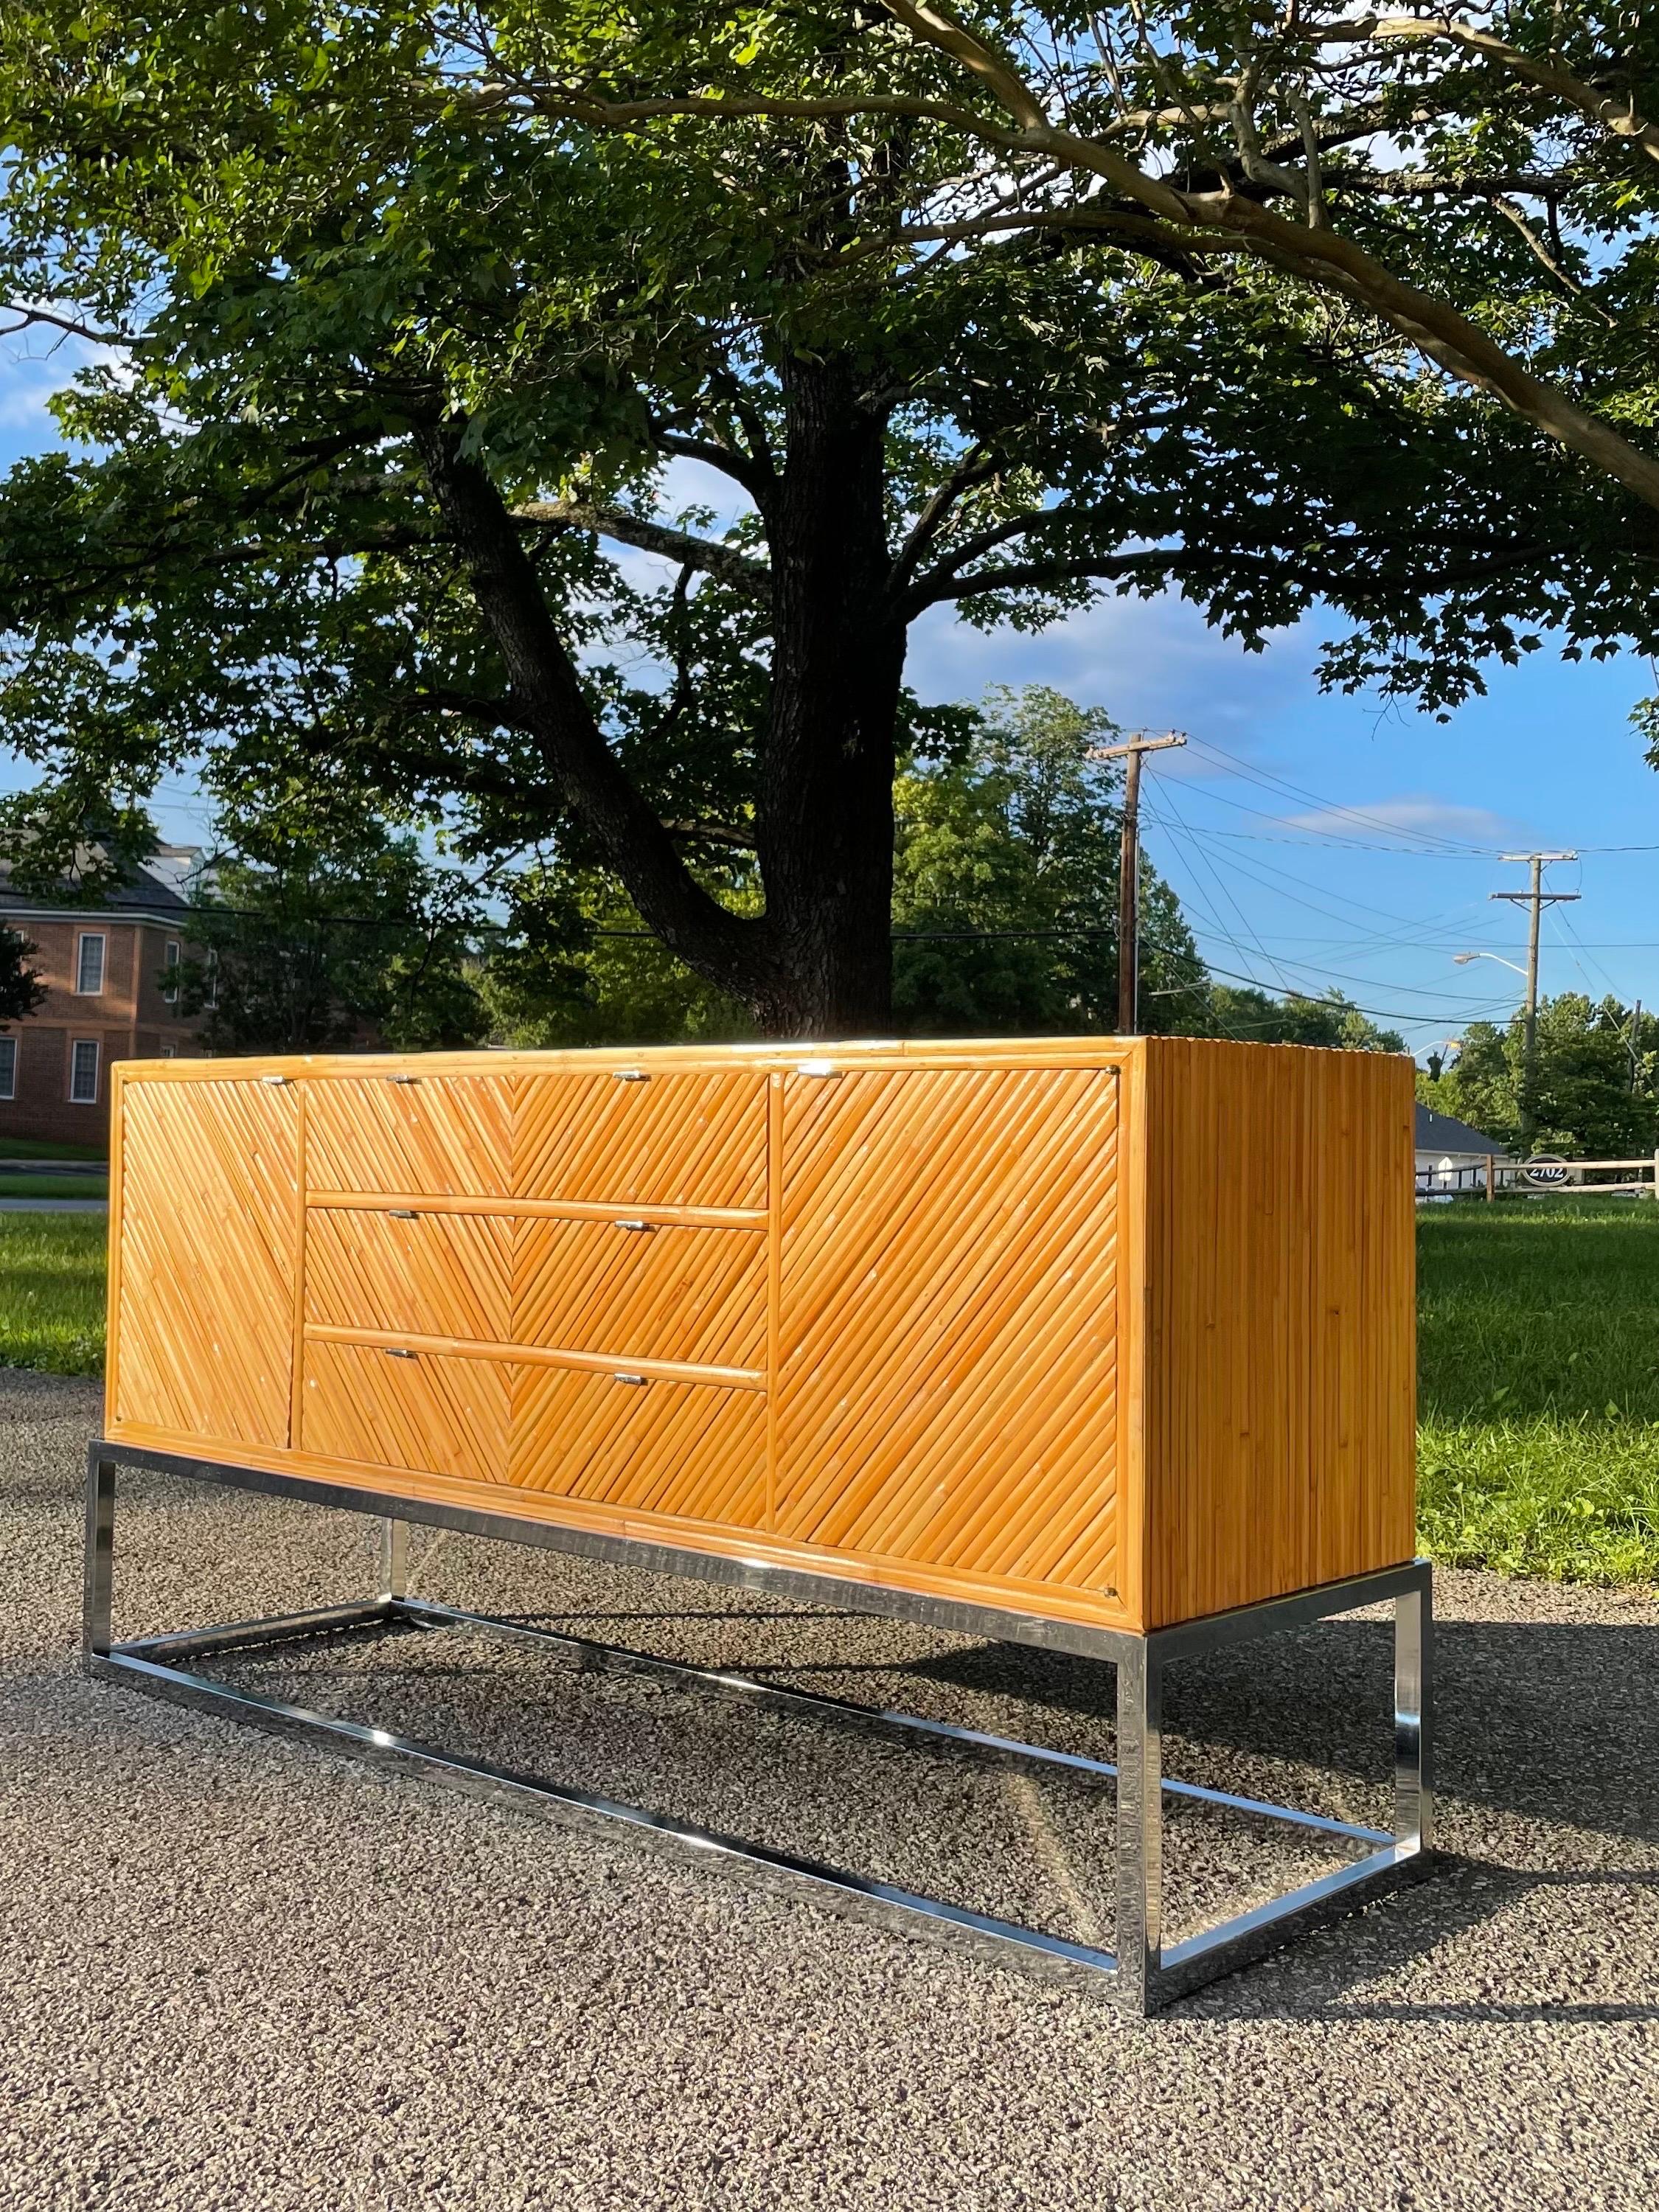 Gorgeous split reed bamboo credenza in beautiful condition with chrome base circa 1970s. Credenza is finished on all sides allowing piece to stand freely in the room. An incredible piece that would go well with almost any style. 

Other notable